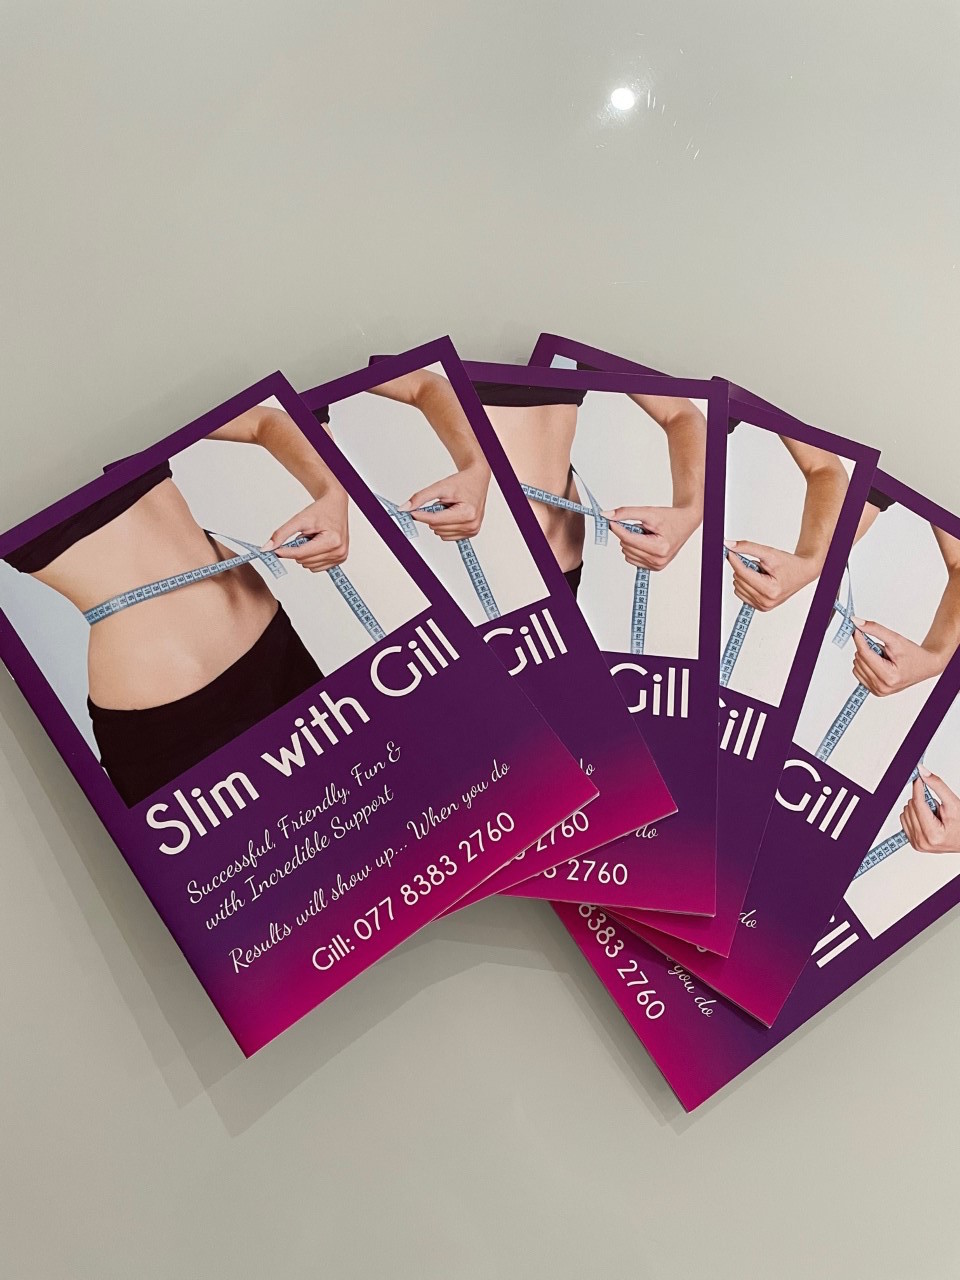 Business Flyers and Leaflets printed by Gillprint Ltd, Dungannon, Northern Ireland